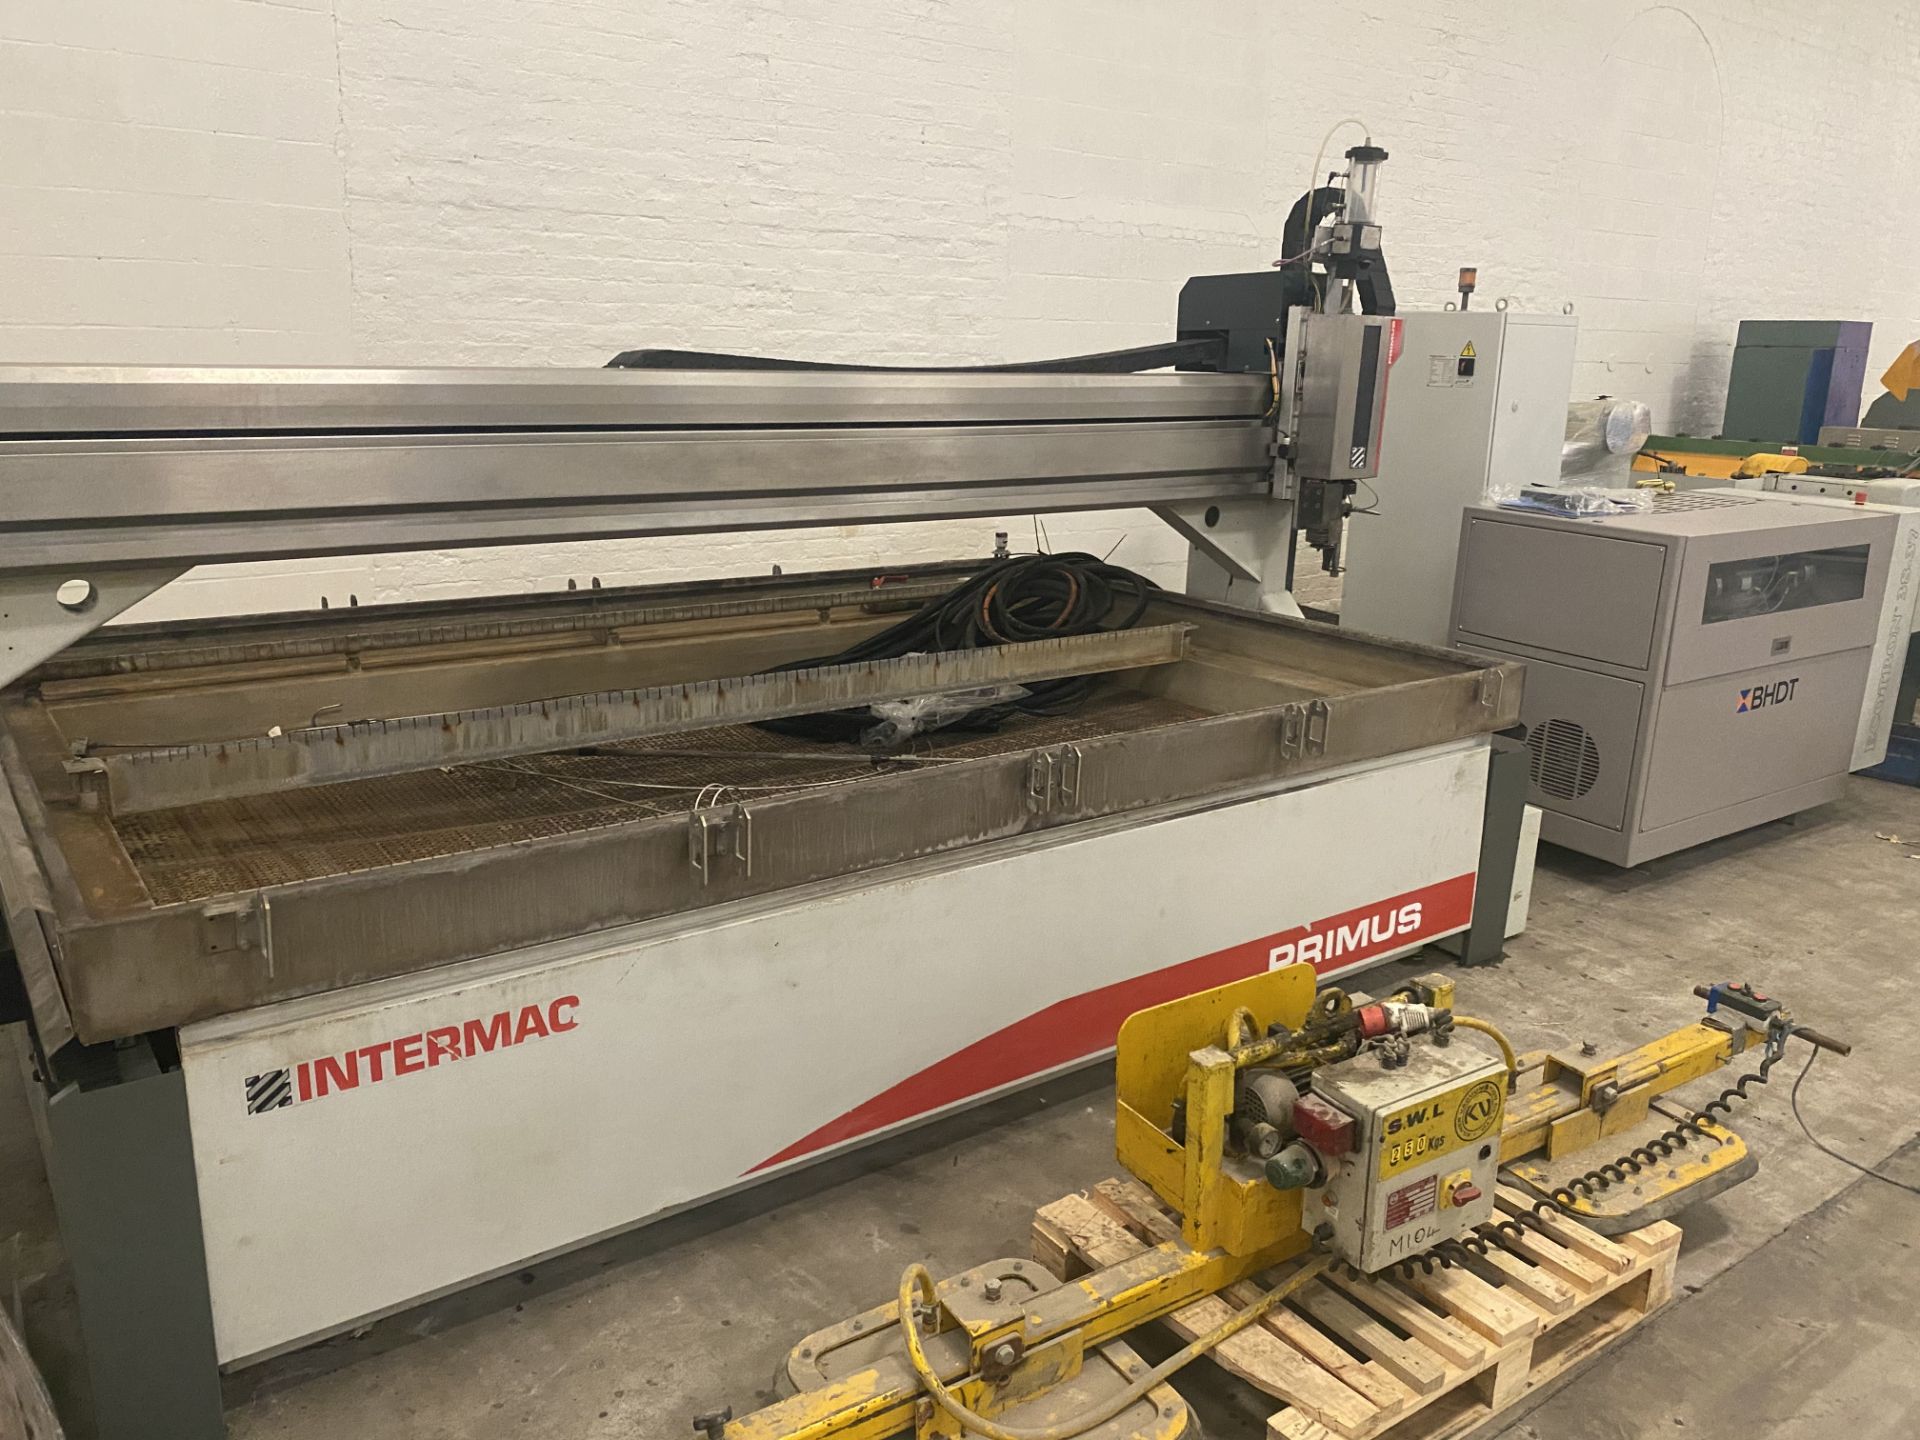 Intermac Primus 322 Advanced Material Water Jet, serial no. 1000002466, year of manufacture 2014,